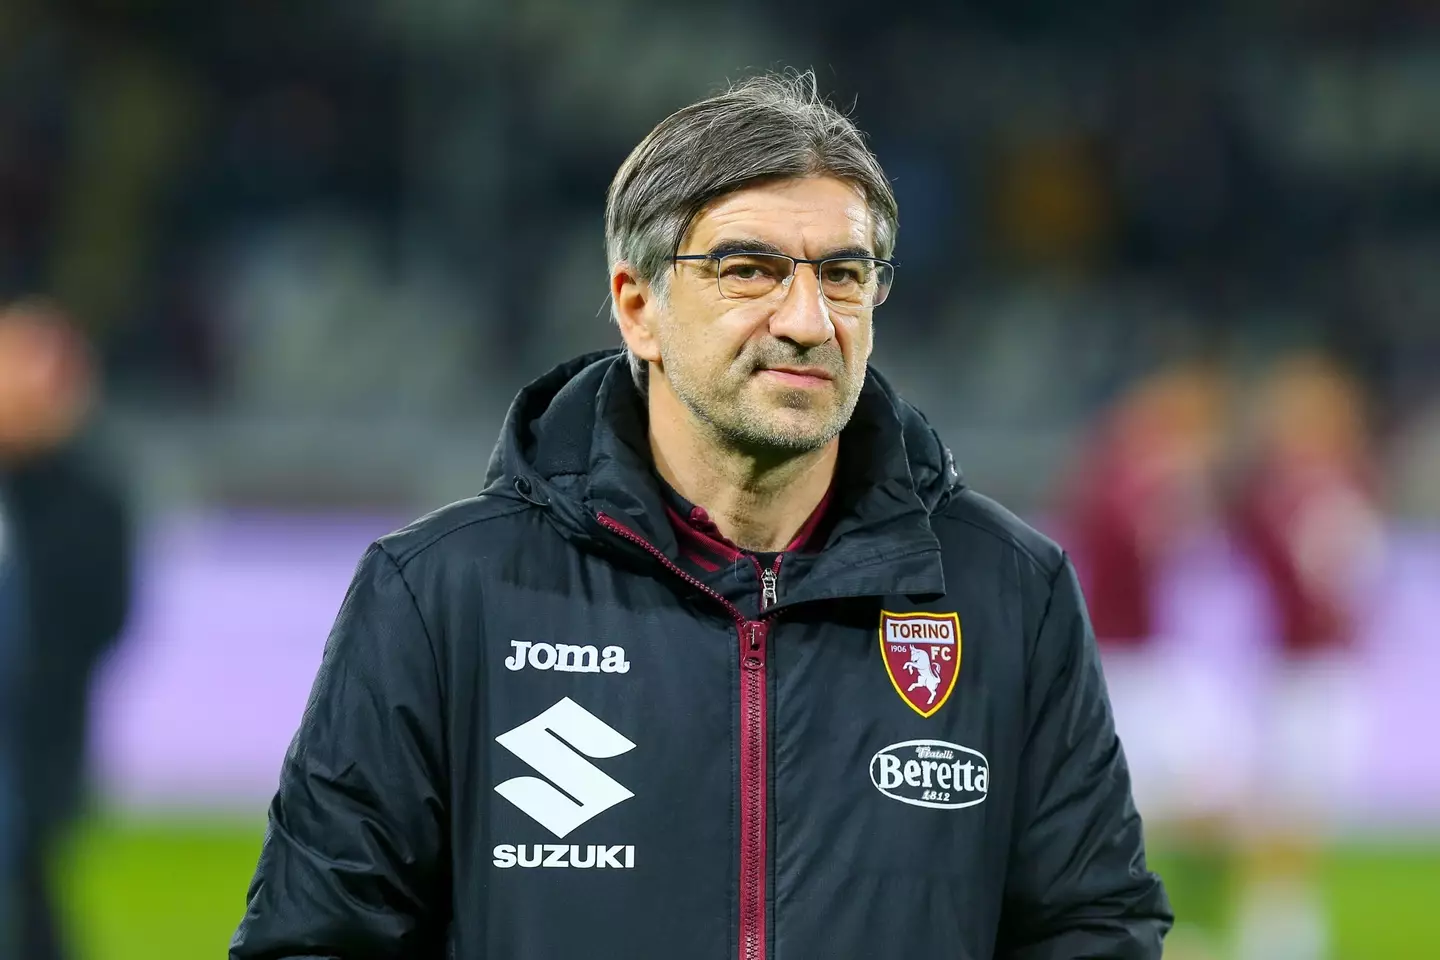 Juric was appointed Torino manager in July last year (Image: Alamy)